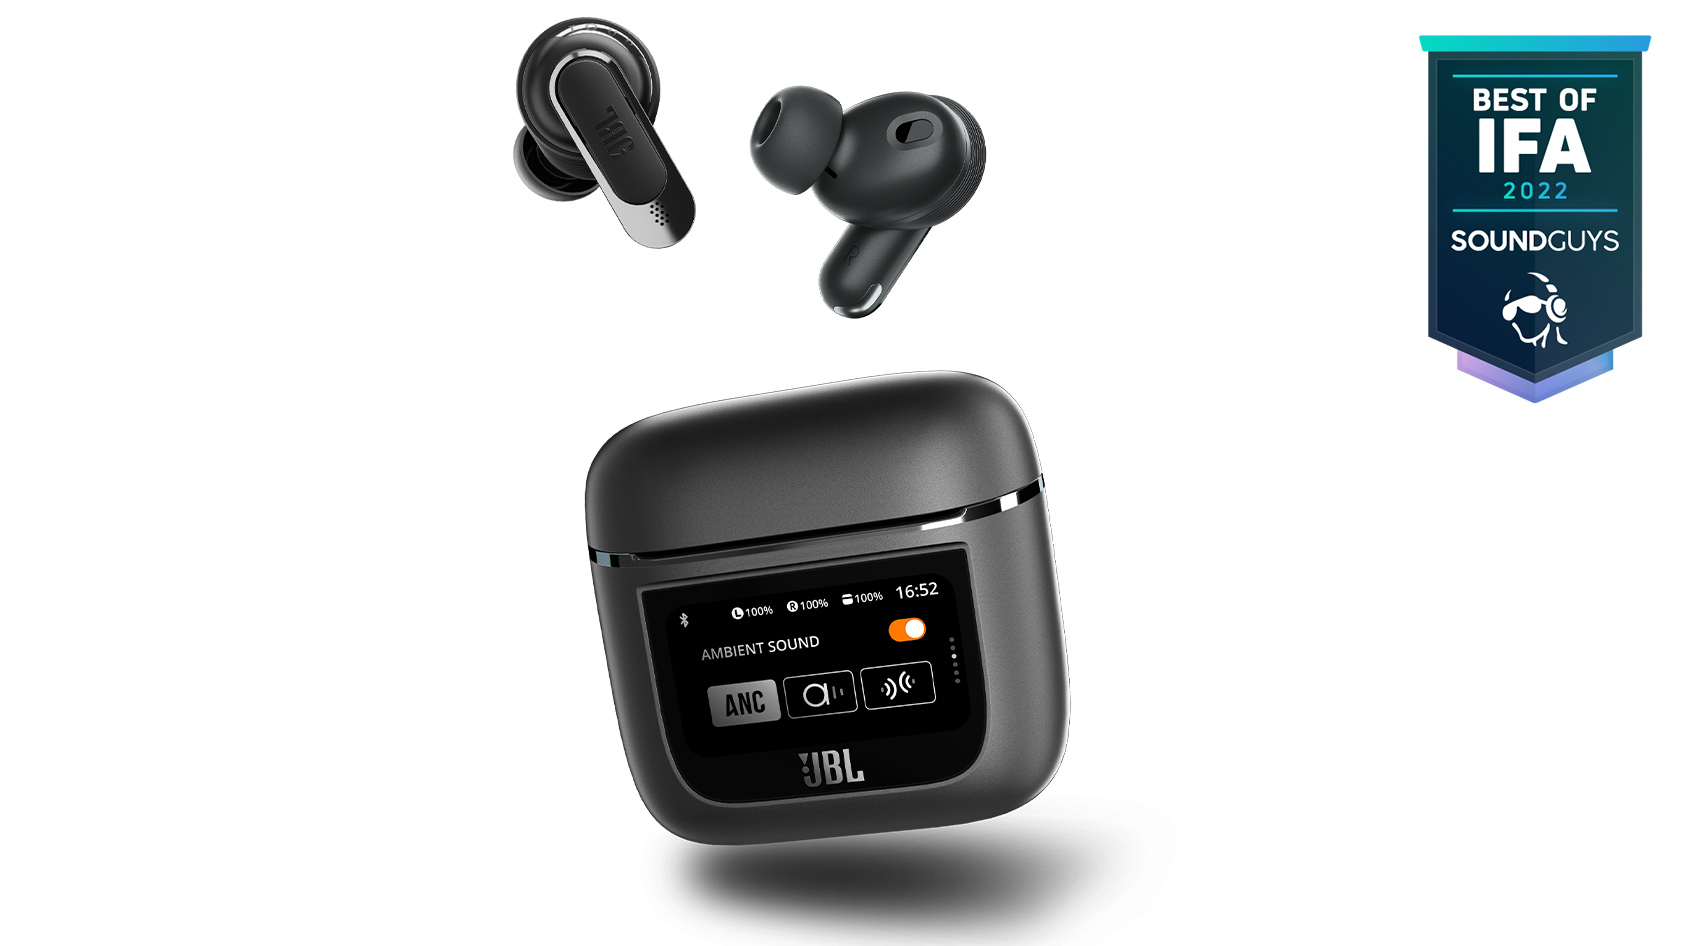 The JBL Tour Pro 2 true wireless earbuds and smartwatch-like charging case against a white background.